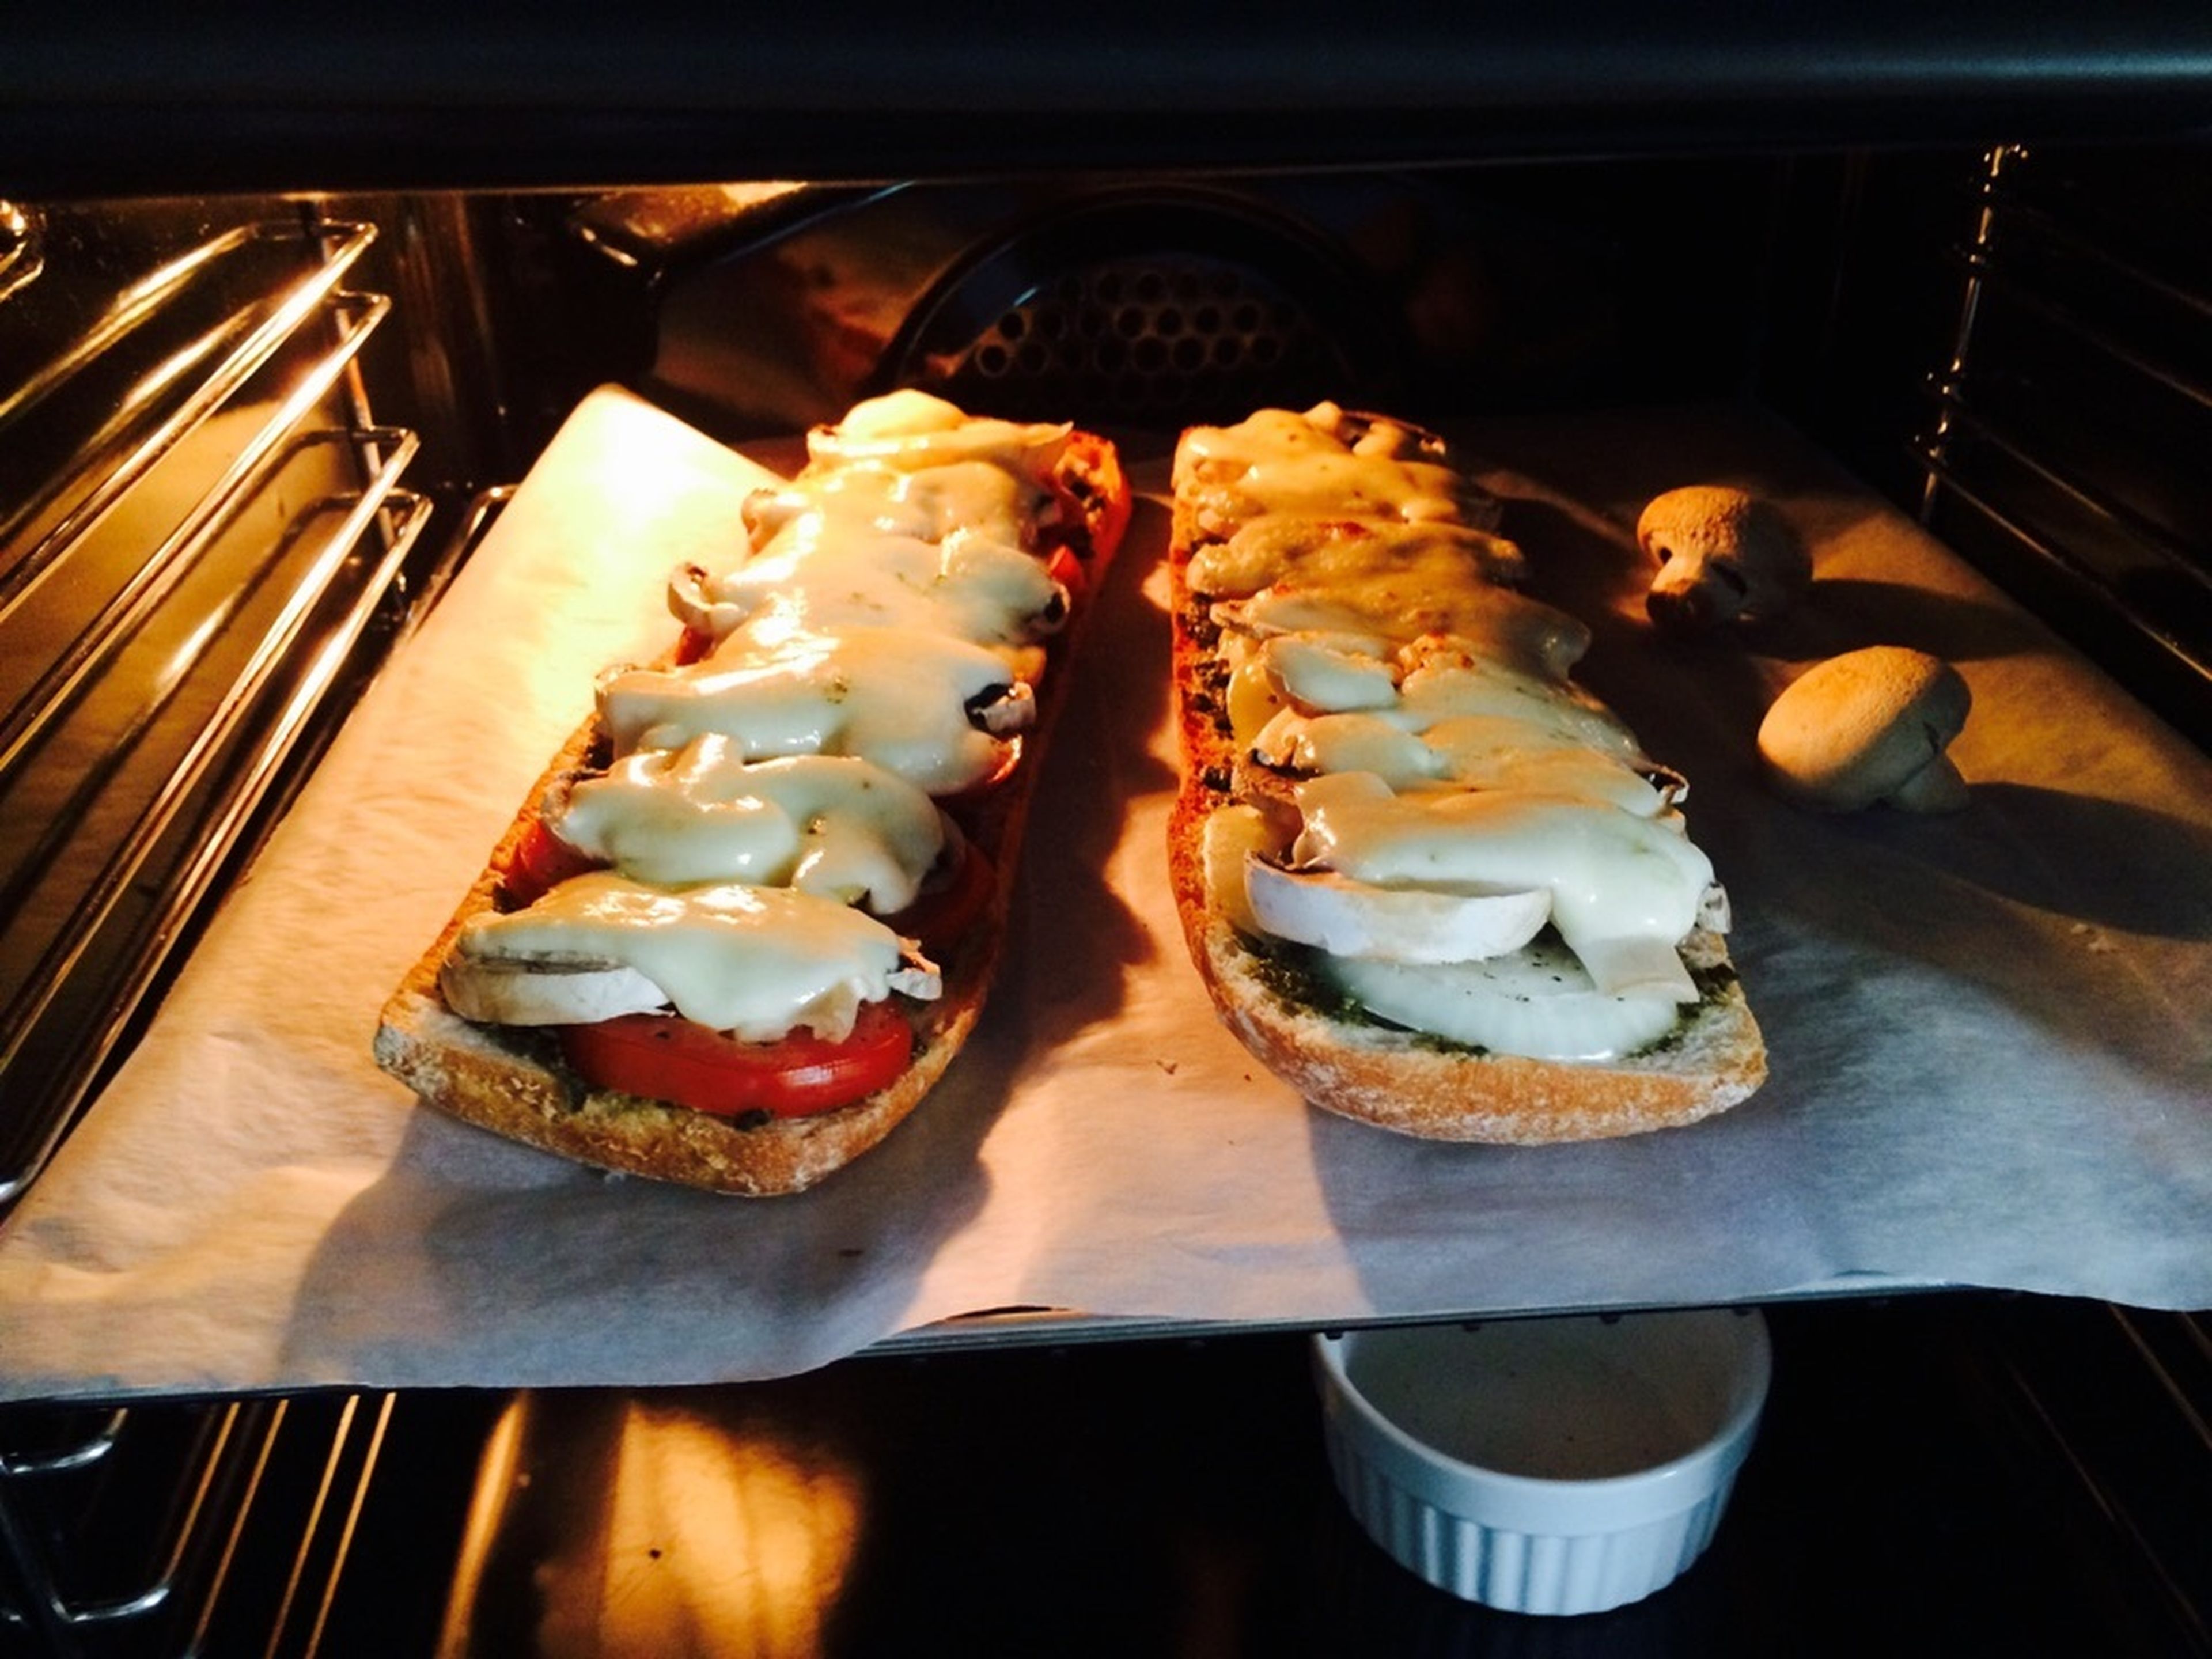 Put in oven and bake for approx. 15 – 20 min. at 200°C/390°F until mozzarella has melted.